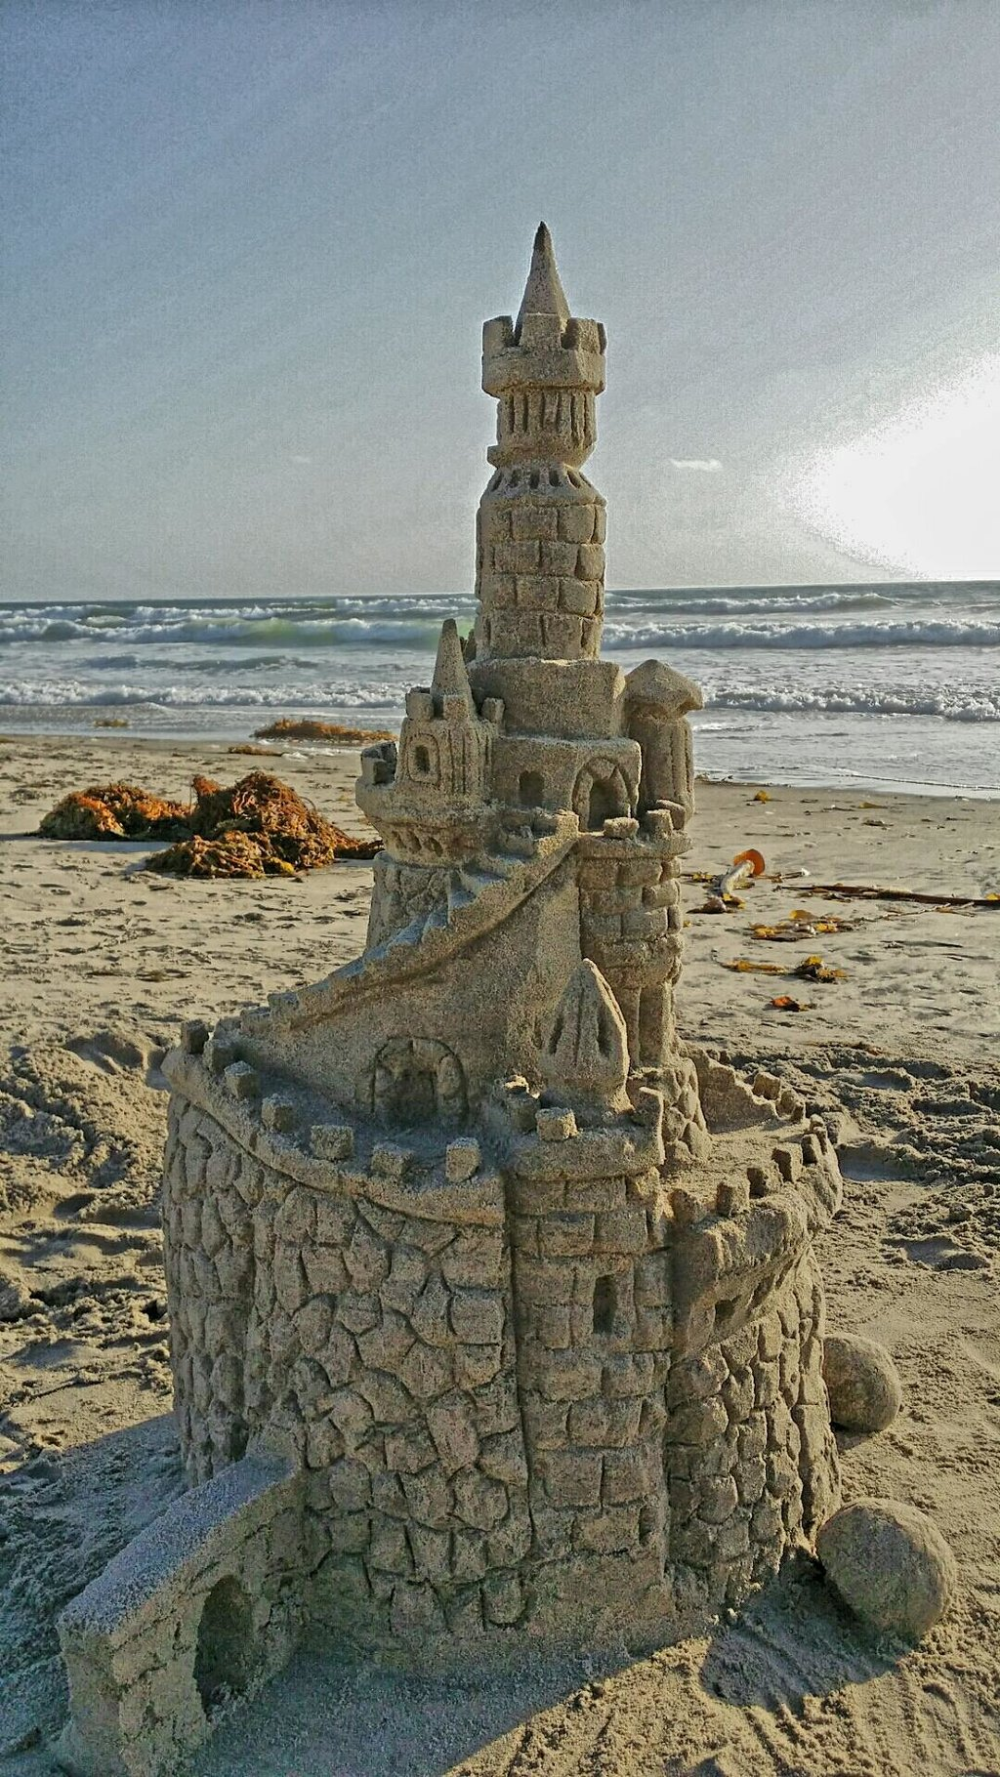 San Diego Sand Castles 2020 All You Need To Know Before You Go with